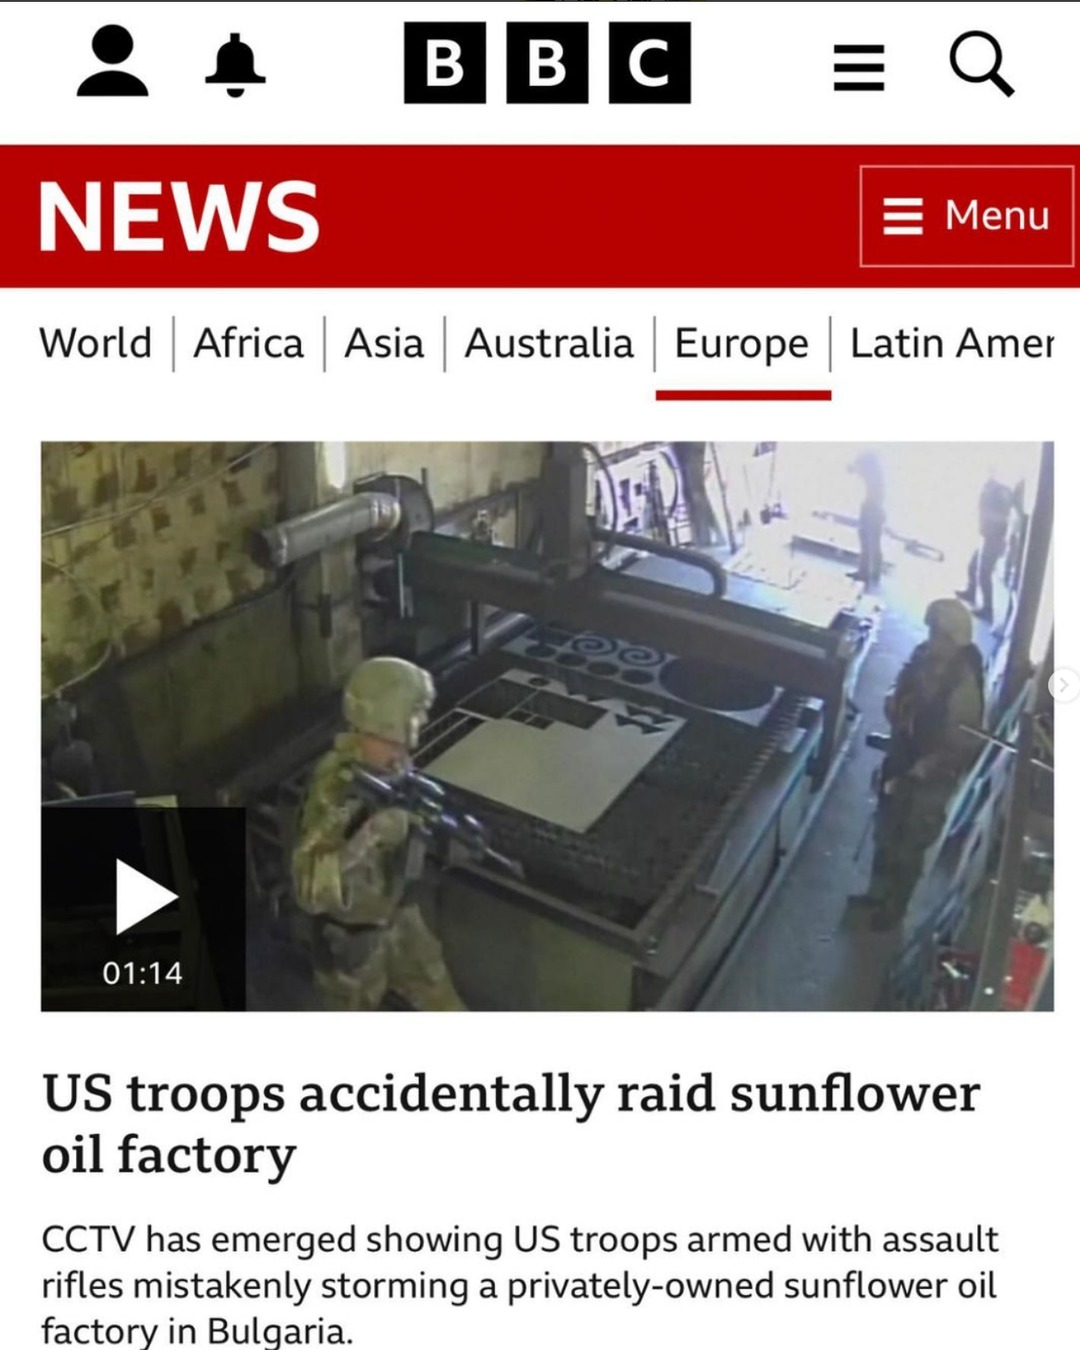 US troops armed with assault rifles mistakenly stormed a  sunflower oil factory in Bulgaria. They were taking part in a Nato military exercise, with the aim of clearing the airbase next door. - meme